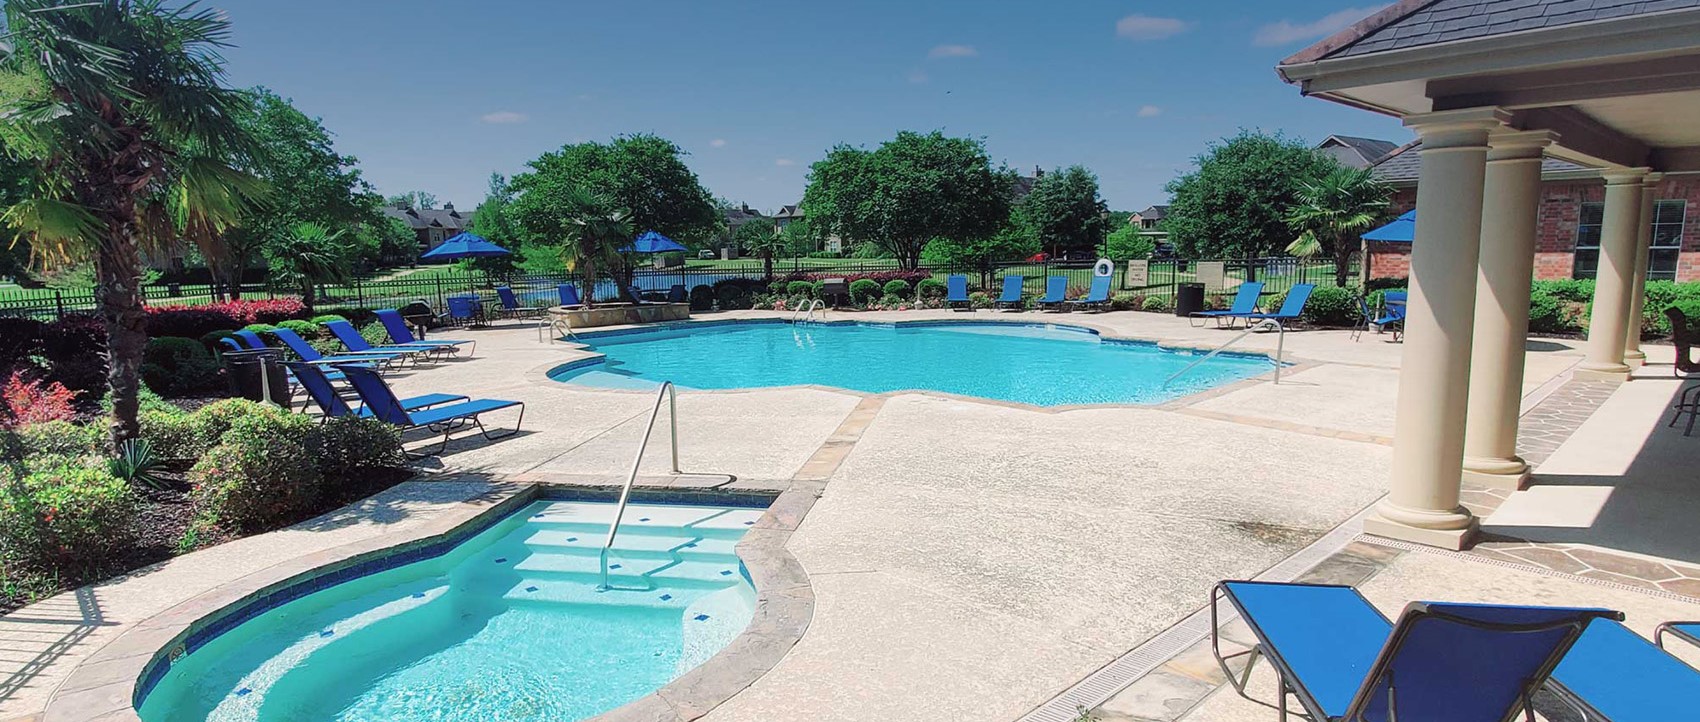 Magnolia Trace Apartments with Swimming Pool